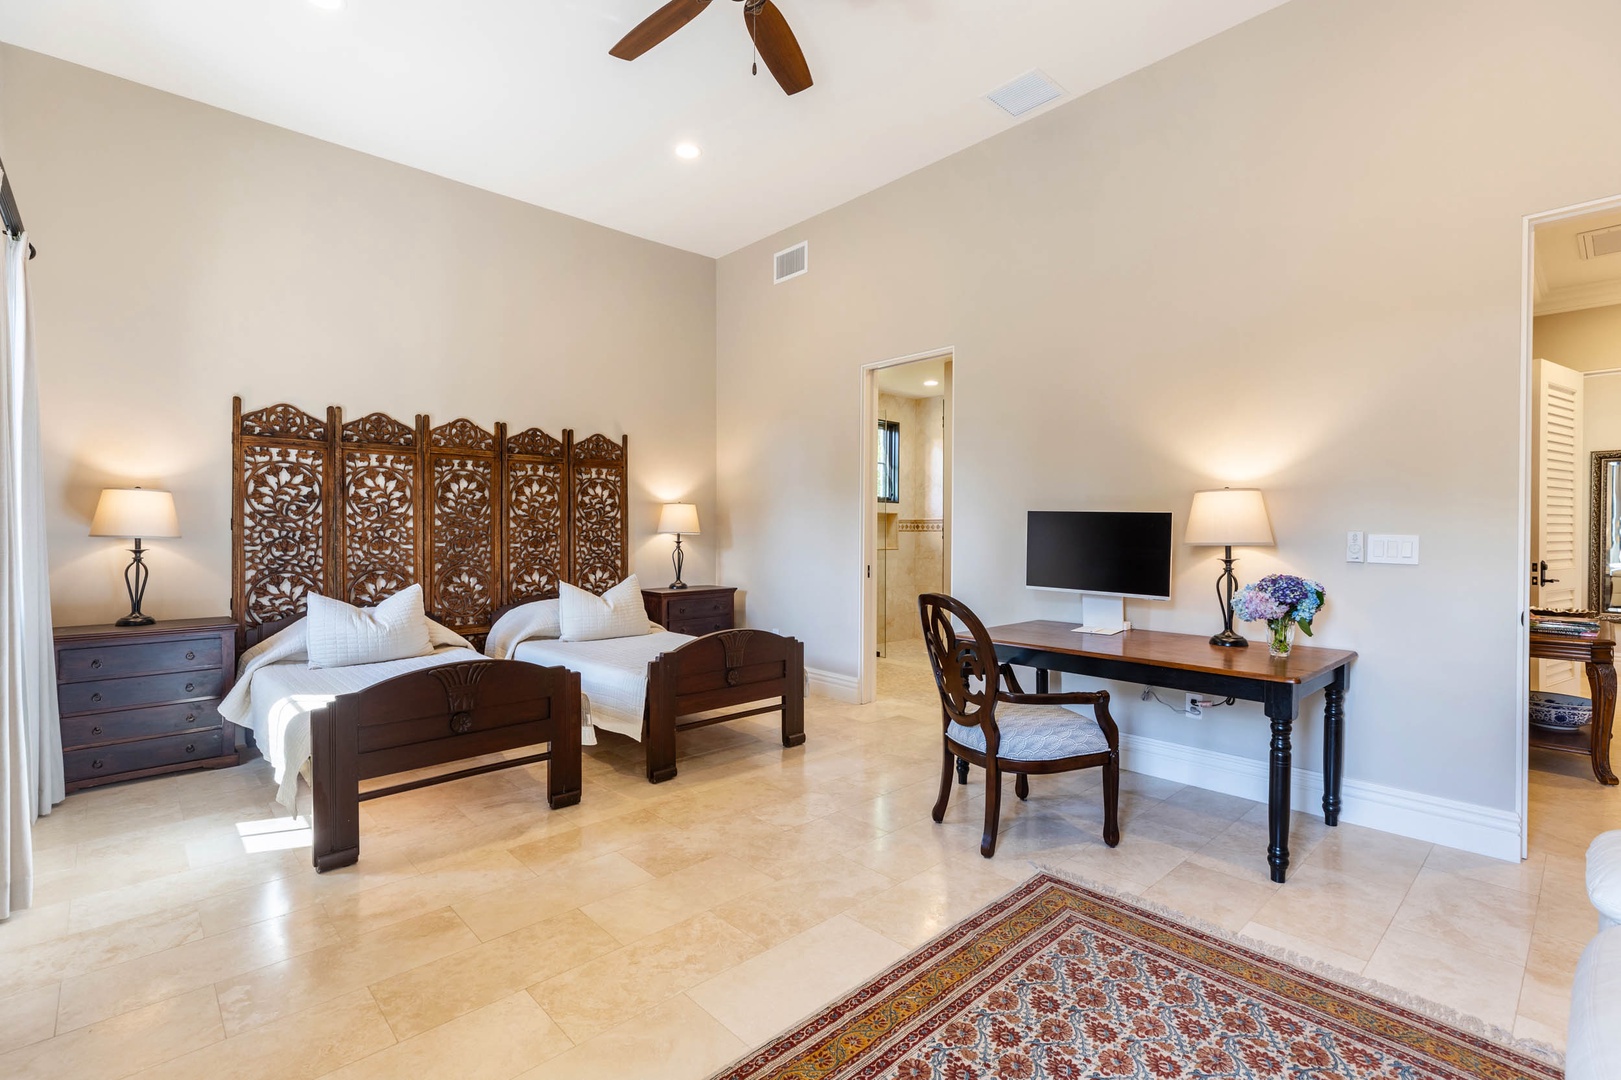 Honolulu Vacation Rentals, The Kahala Mansion - Guest bedroom four with two twin beds.